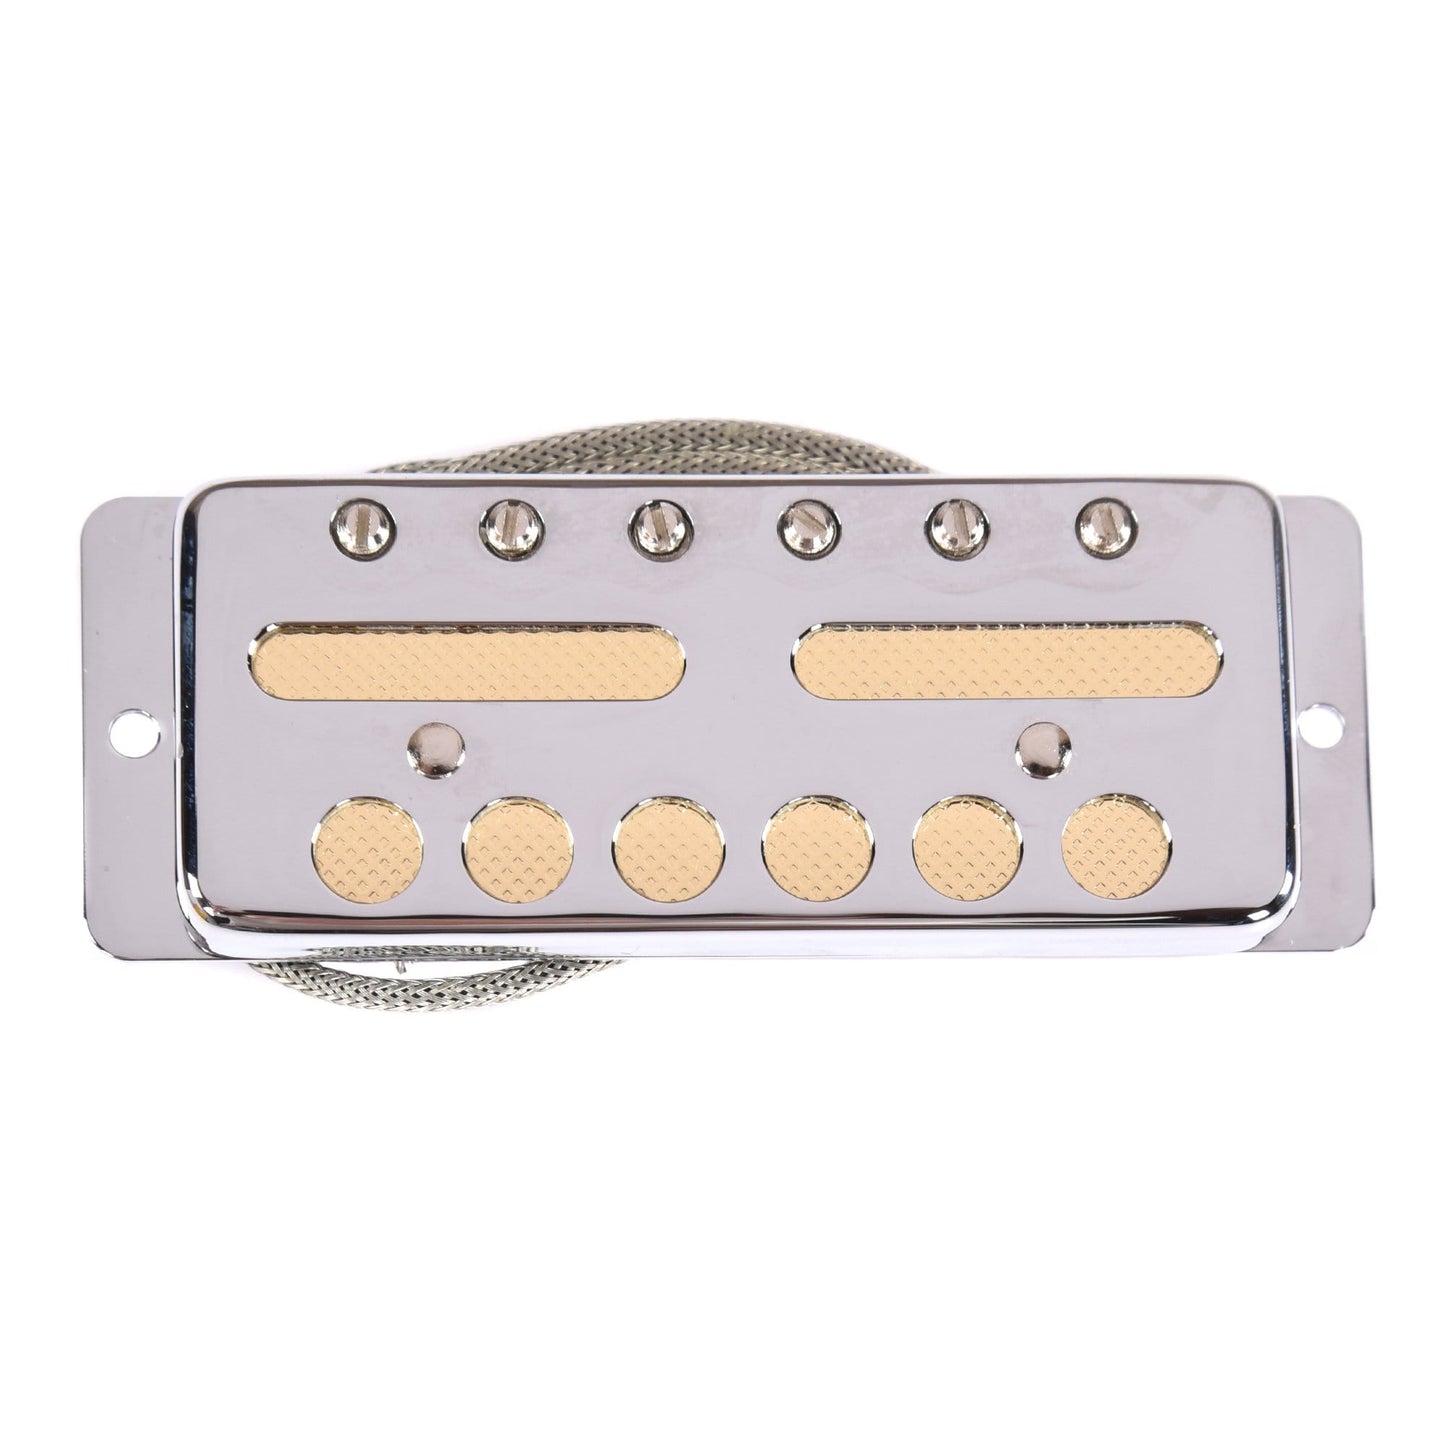 Lollar Gold Foil Teisco-style Single Coil Pickup Neck Chrome Parts / Guitar Pickups